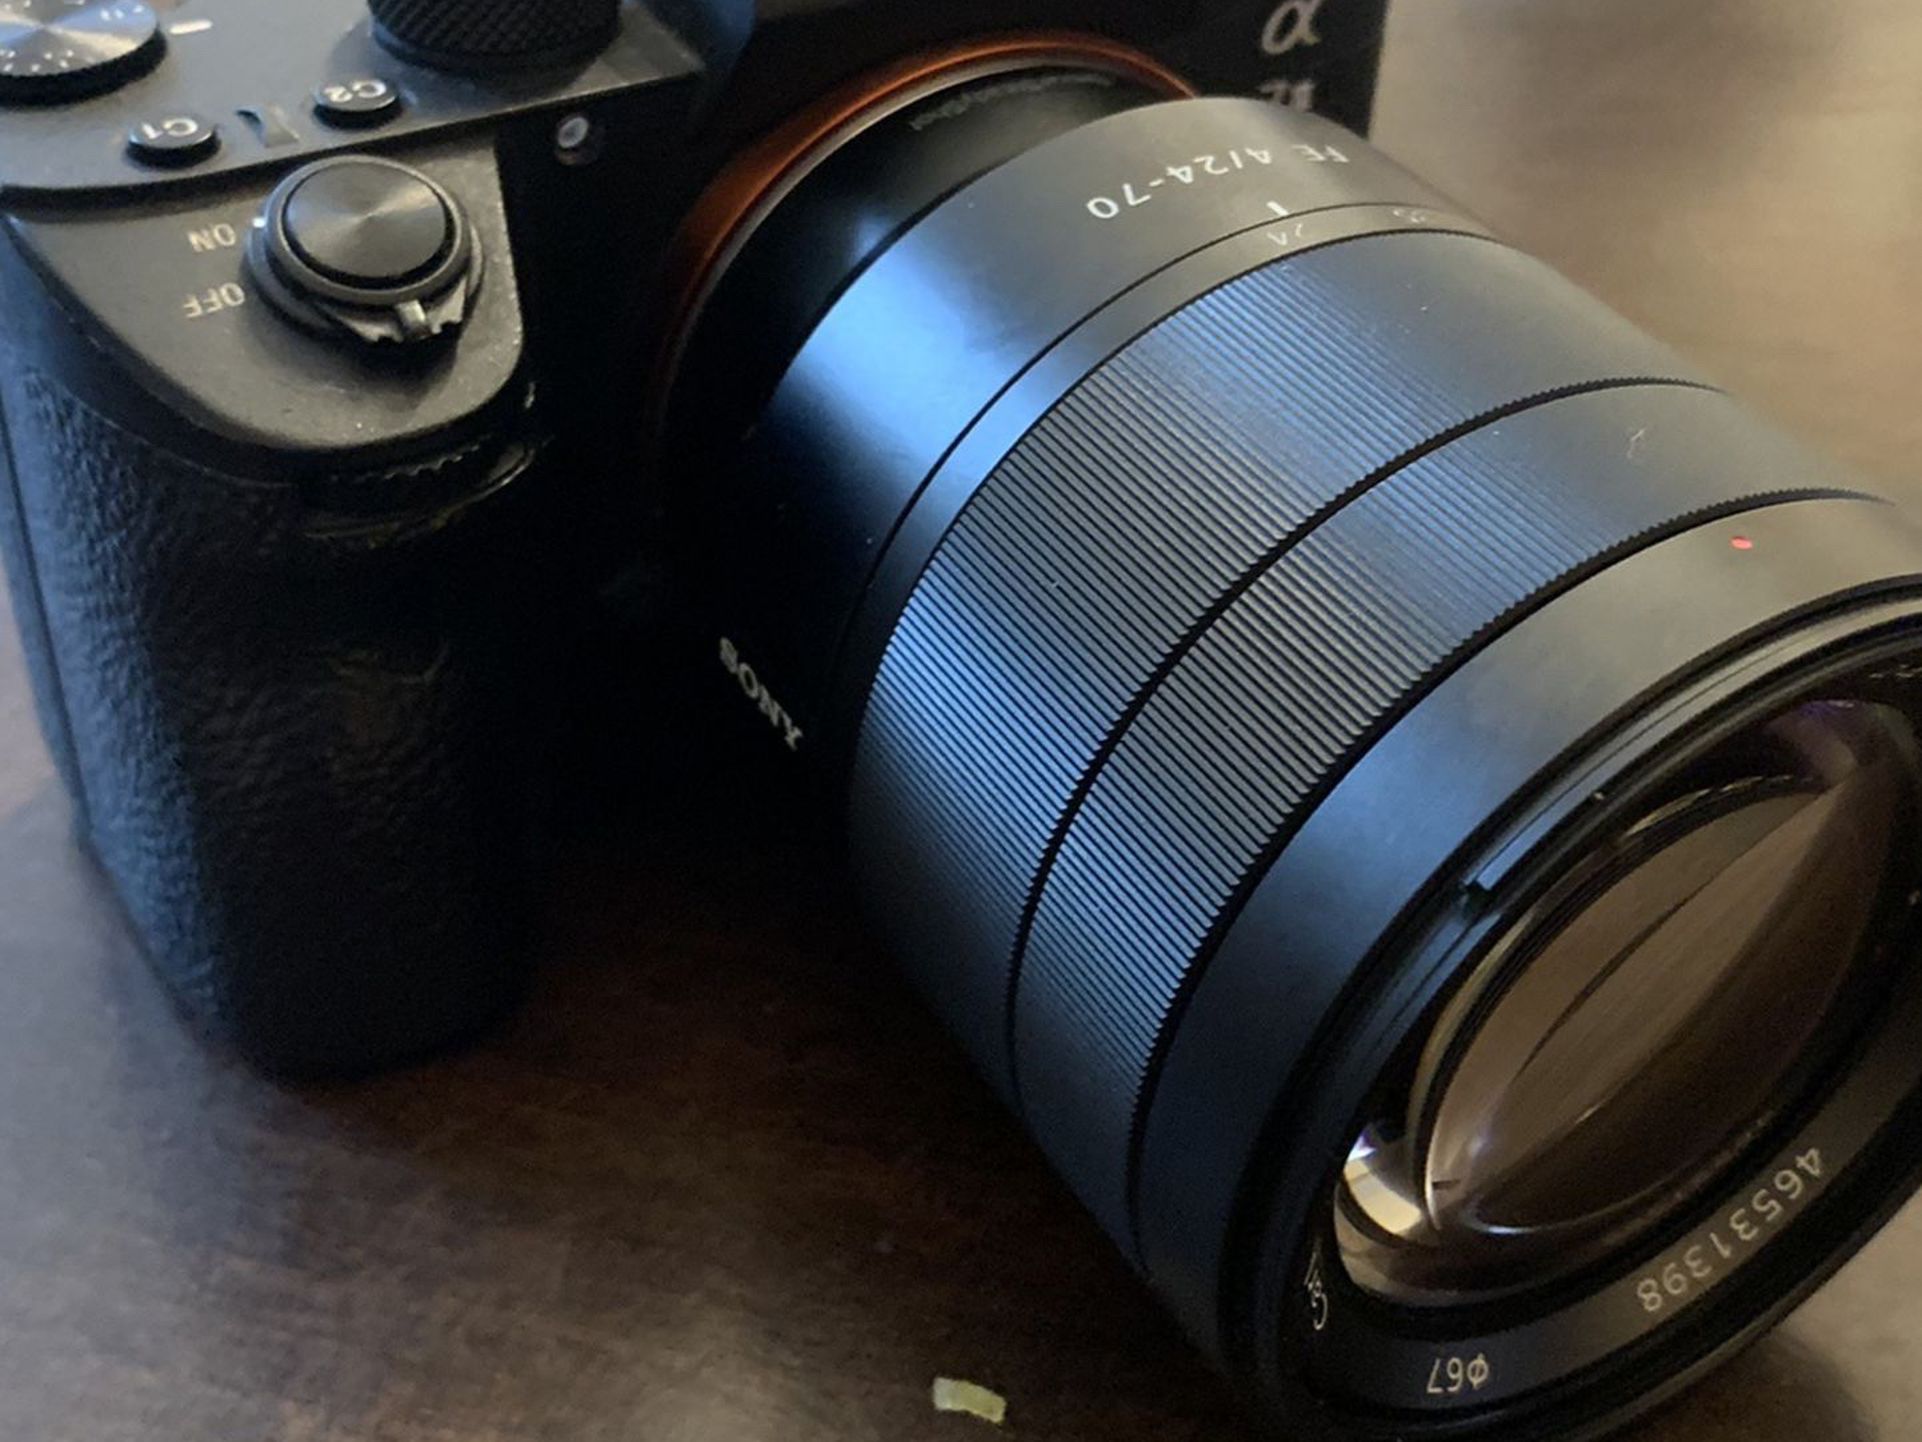 Sony A7iii and Ziess 24-70 F4 Lens Combo